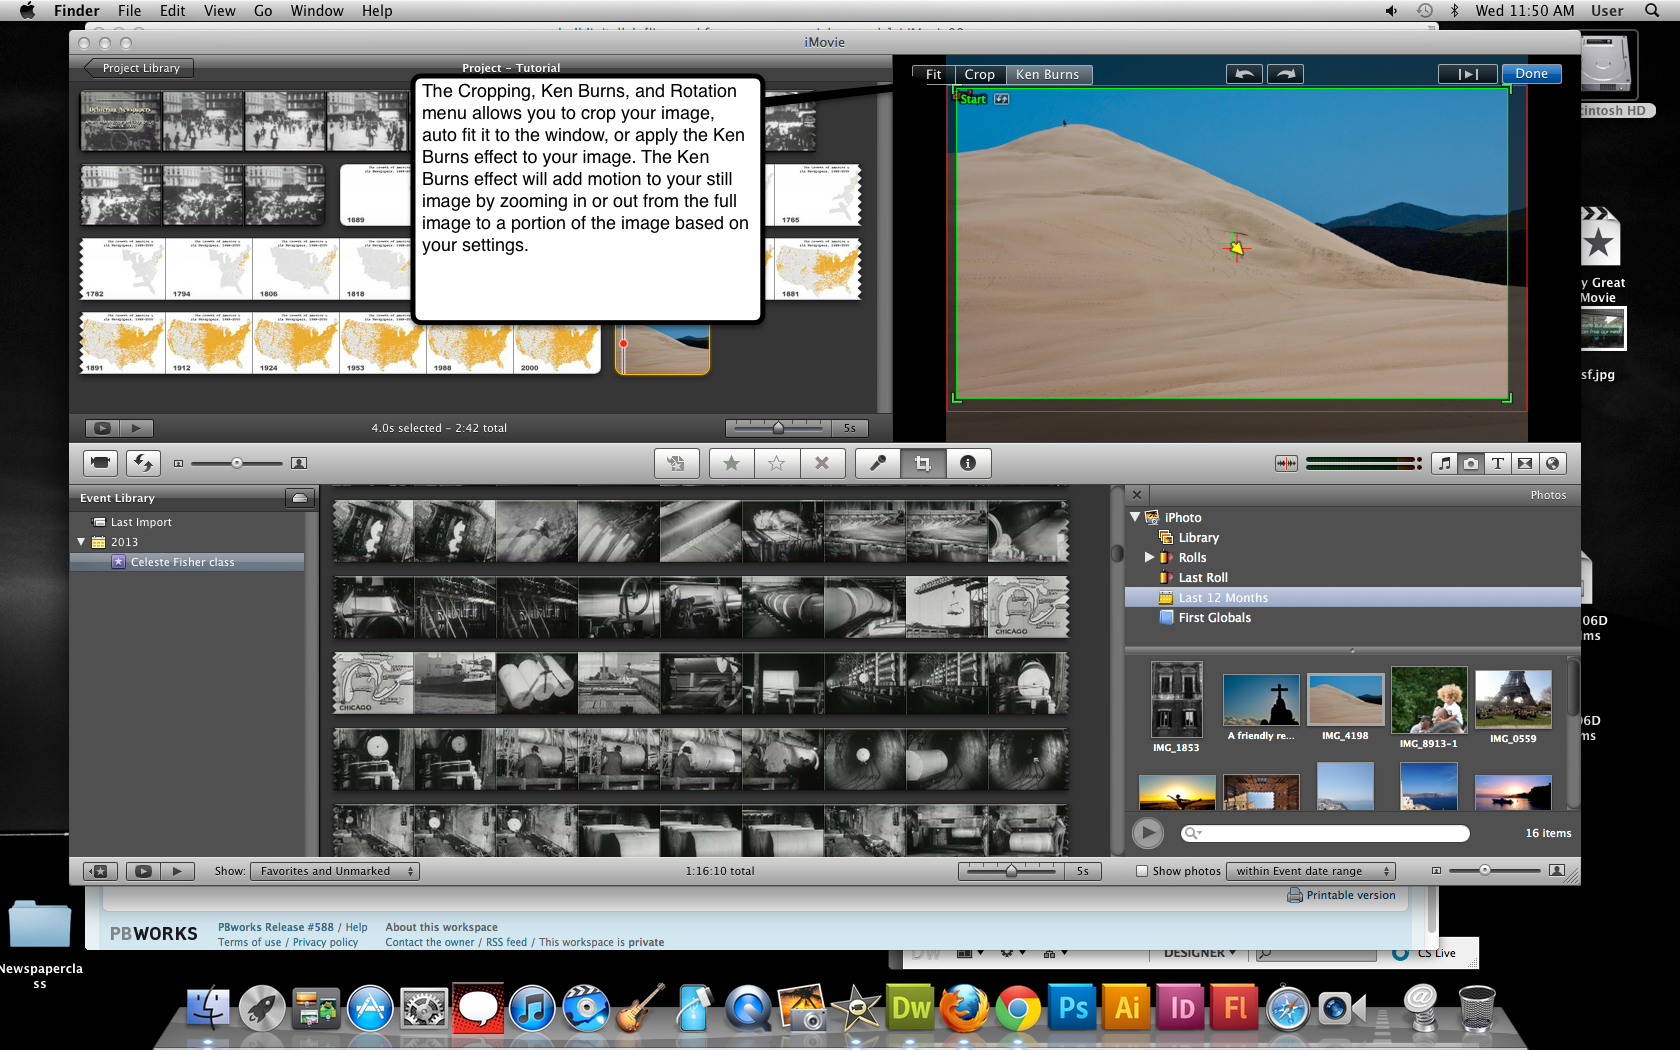 Visual guide to adding photos in iMovie '11